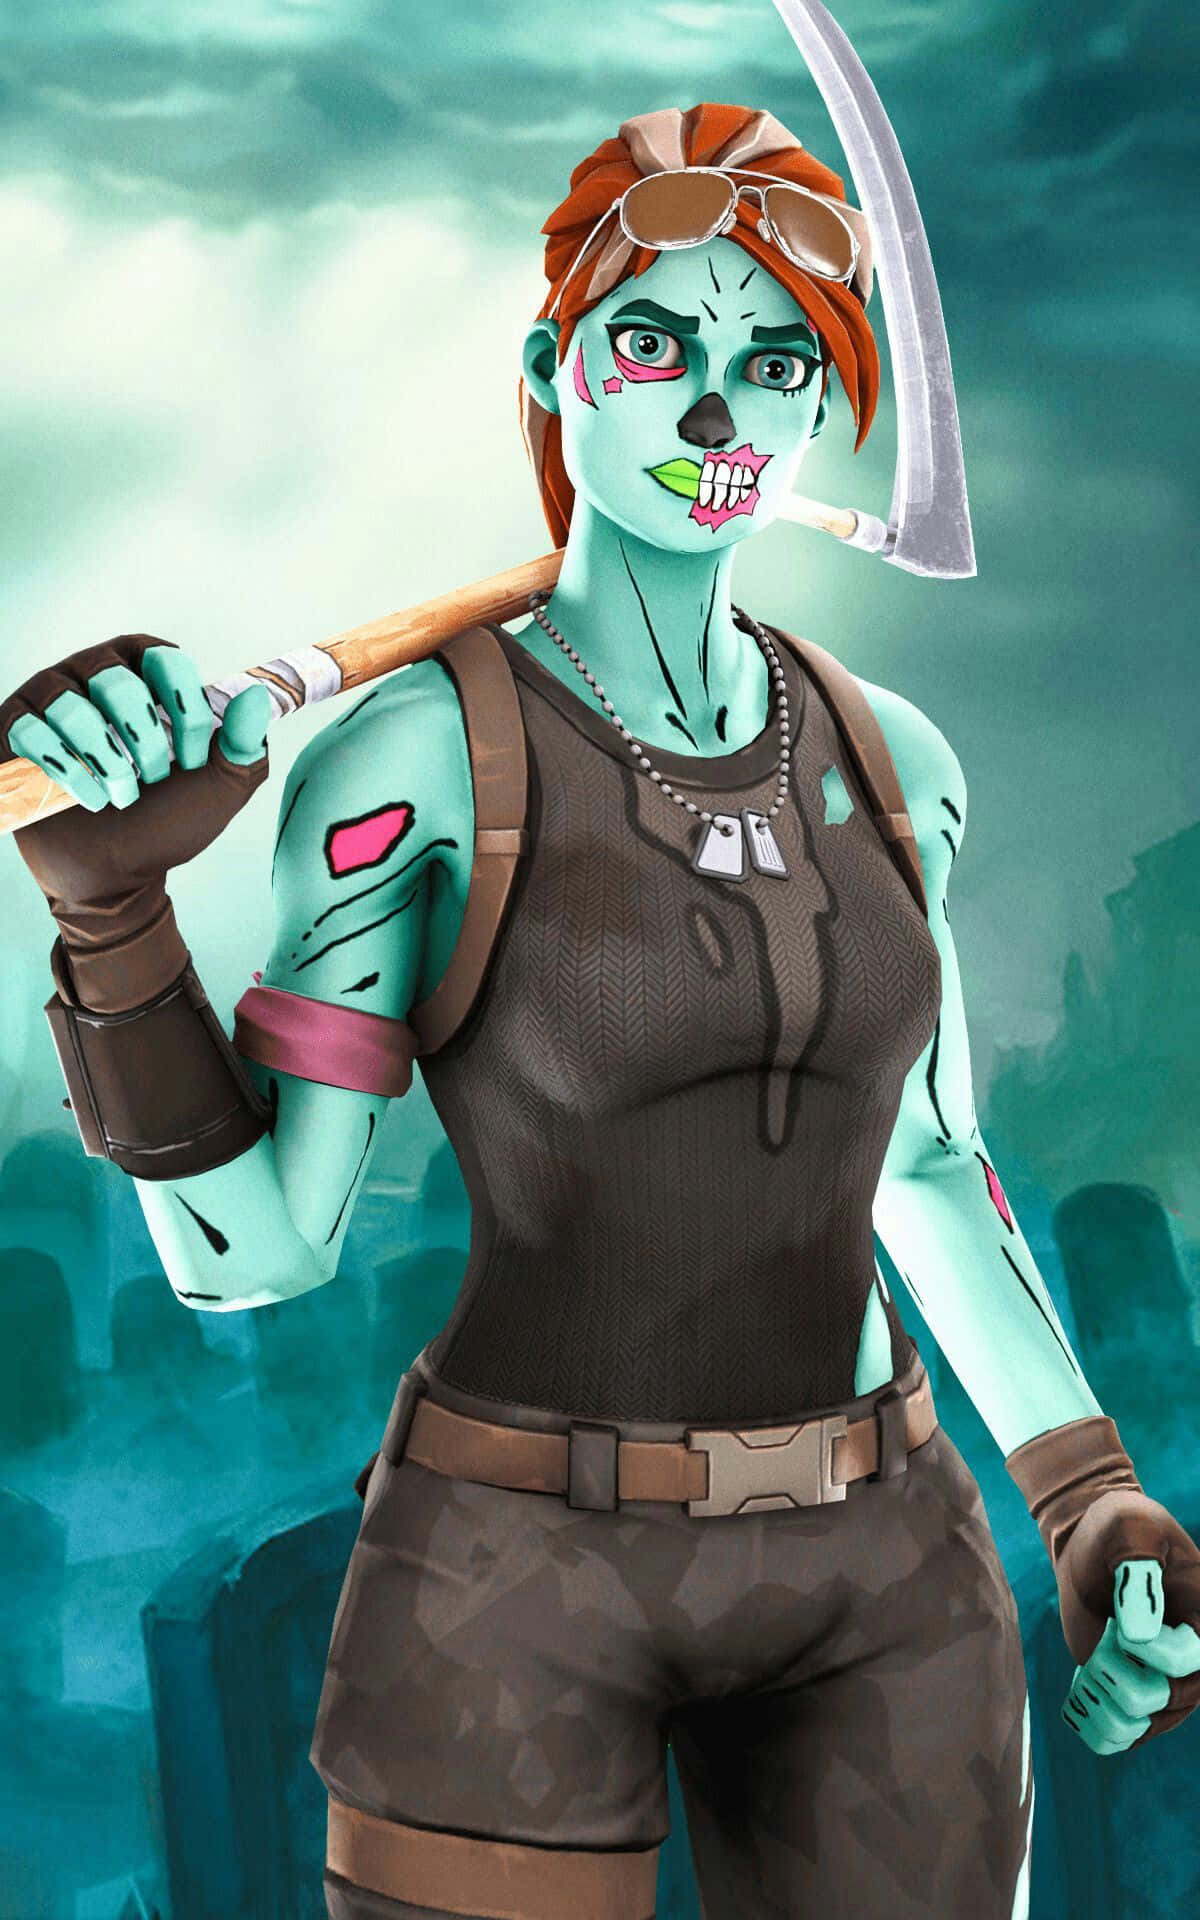 Be cool and stay spooky with the Cool Ghoul Trooper skin! Wallpaper